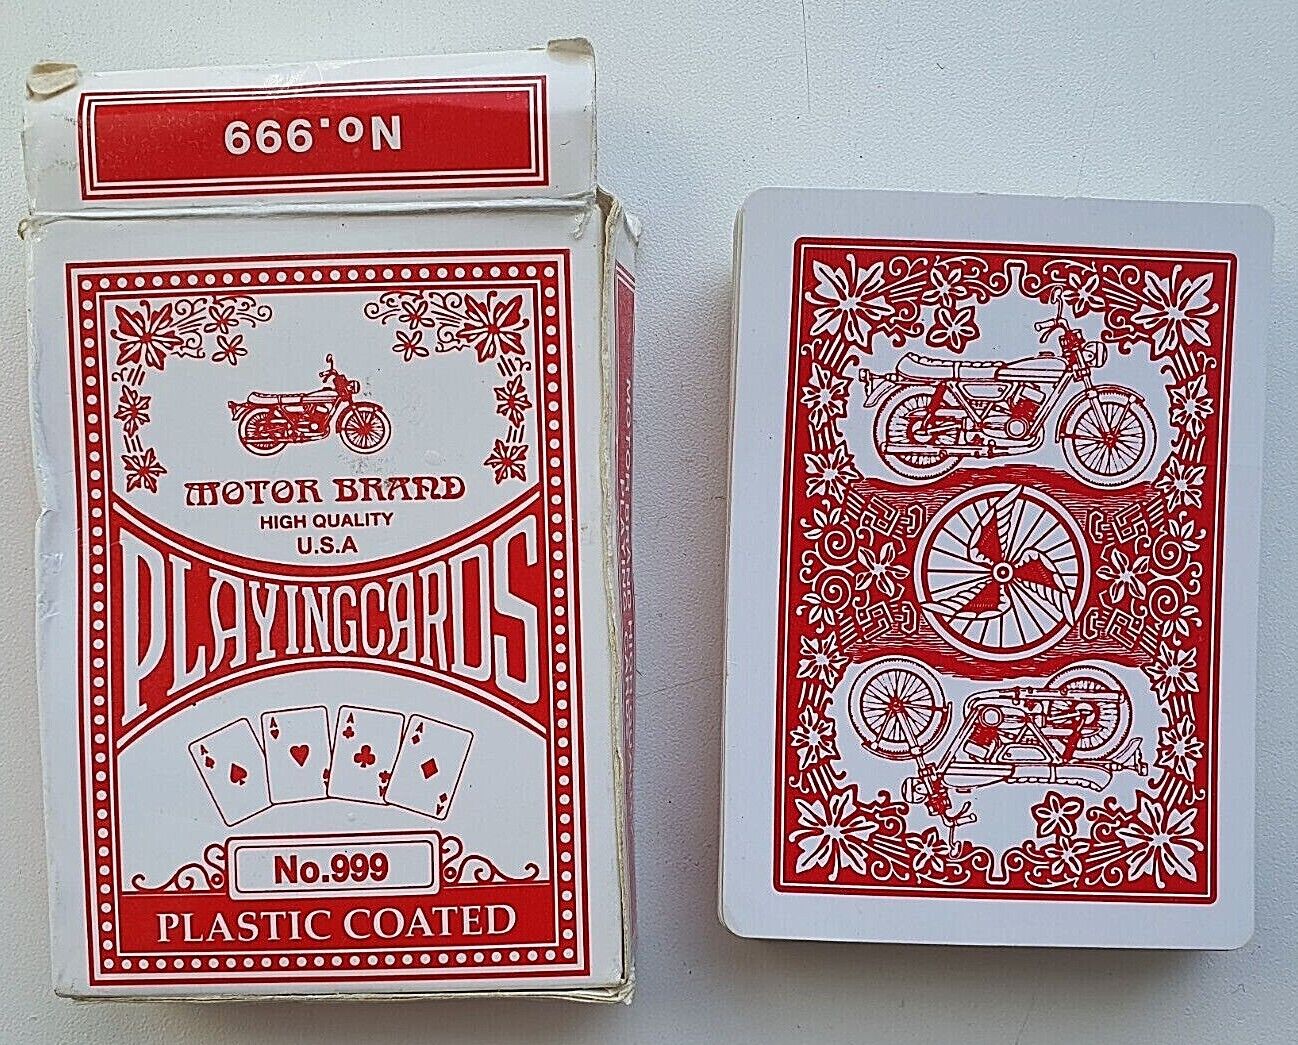 Motor Brand No. 999 plastic coated playing cards High quality U.S.A Vintage 